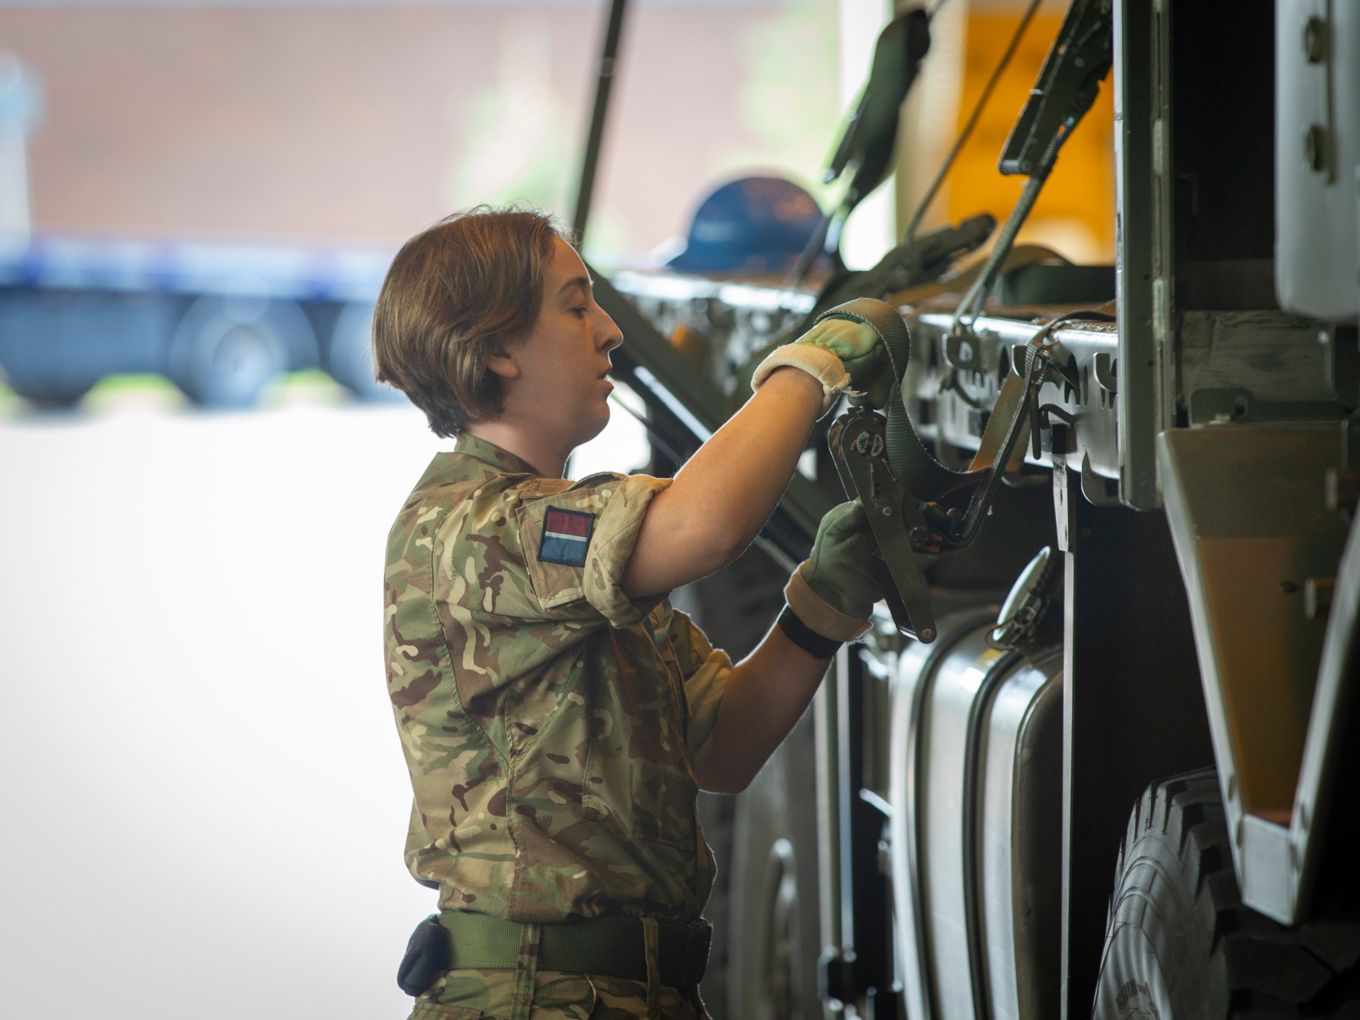 Personnel from No 2 Mechanical Transport Squadron working on vehicles similar to those deployed to Exercise Said Sareea.